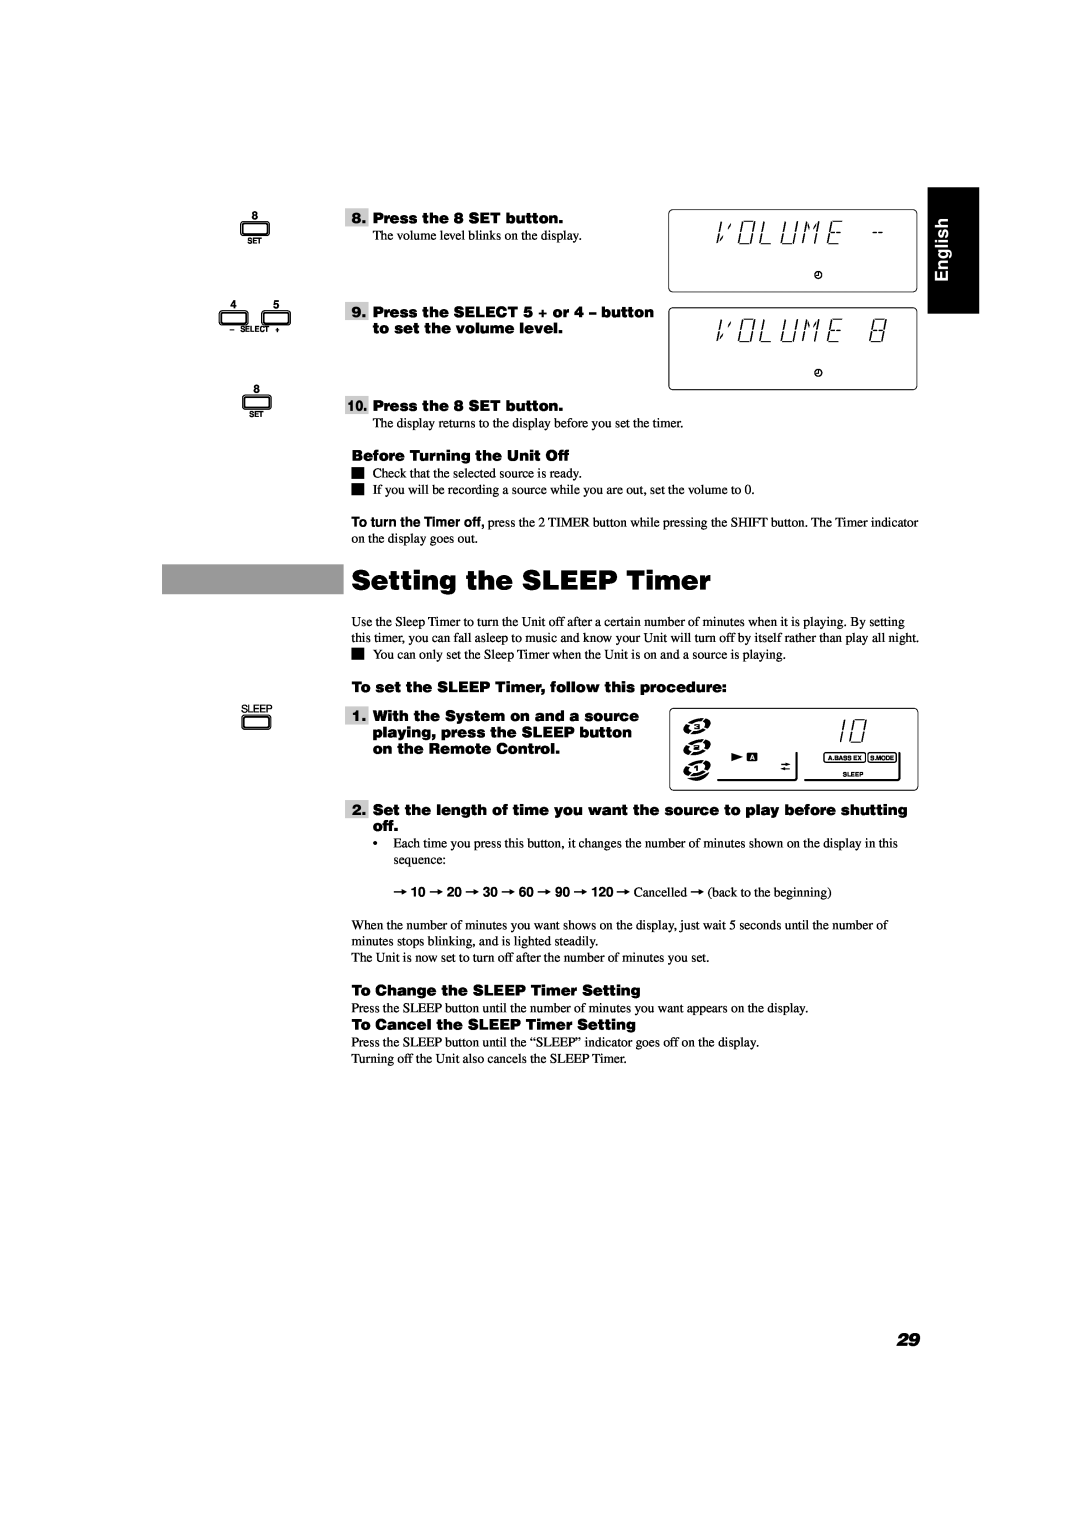 JVC CA-D551TR, CA-D351TR, CA-D451TR Setting the SLEEP Timer, English, Press the 8 SET button, Before Turning the Unit Off 